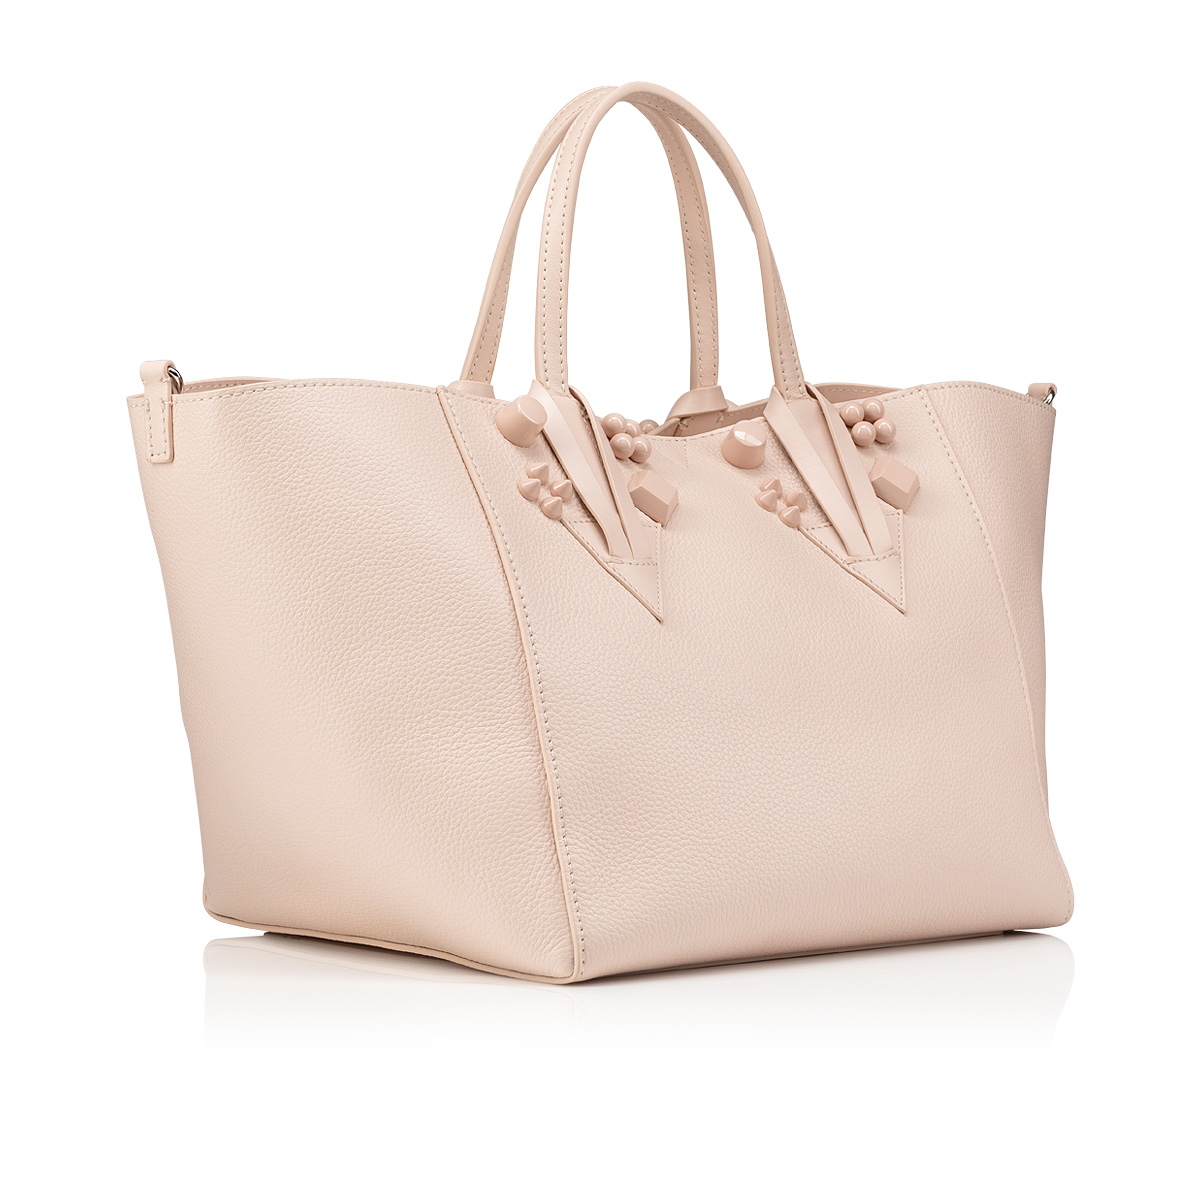 Cabata - Tote bag - Grained calf leather and spikes - Blush